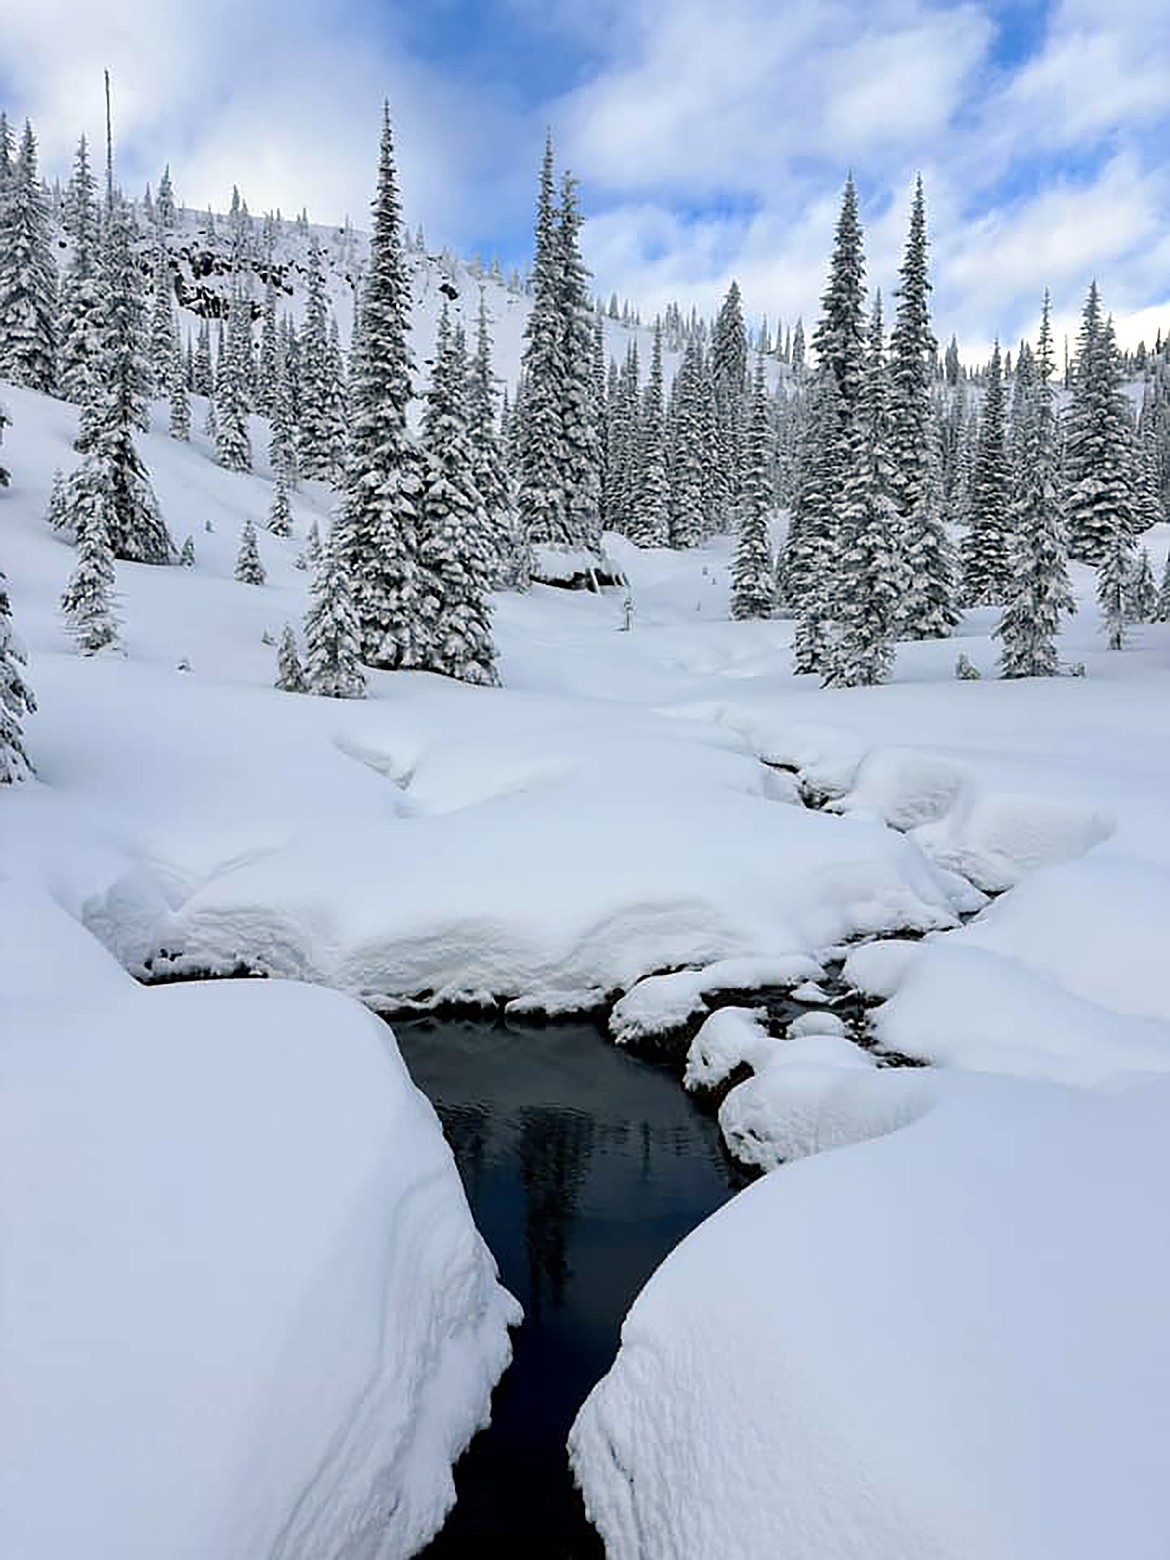 Judah Draxlir shared this photo of the snow in the backcountry this weekend. The region received anywhere from a few inches to more than a foot of new snow after a storm passed through the region on Monday night.